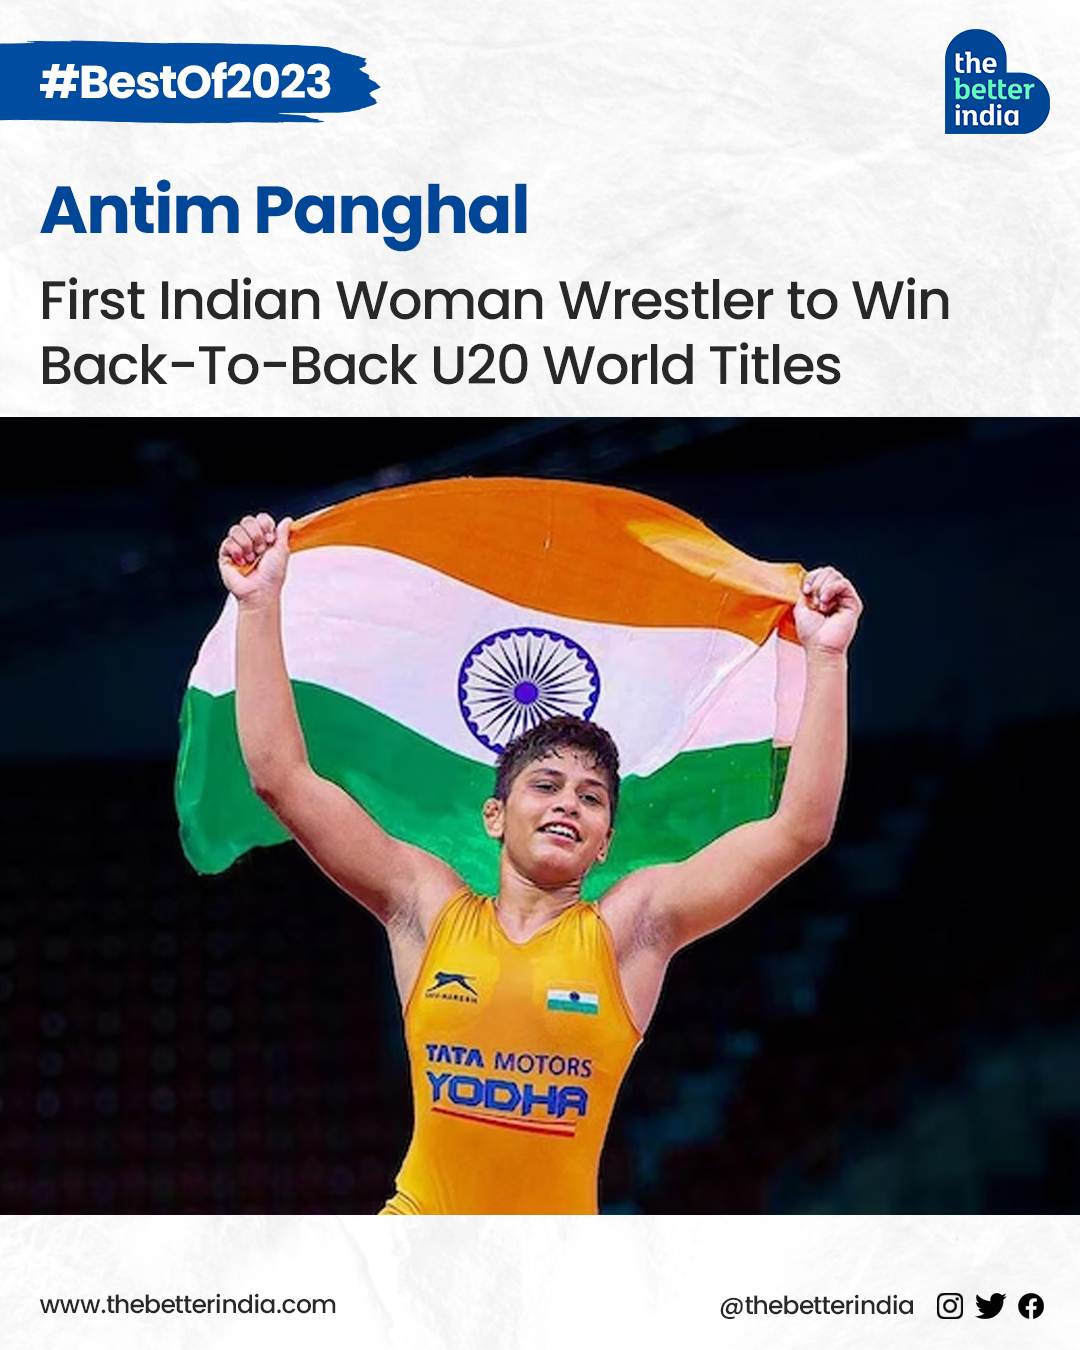 Antim Panghal is the first Indian woman wrestler to win back-to-back U20 world titles